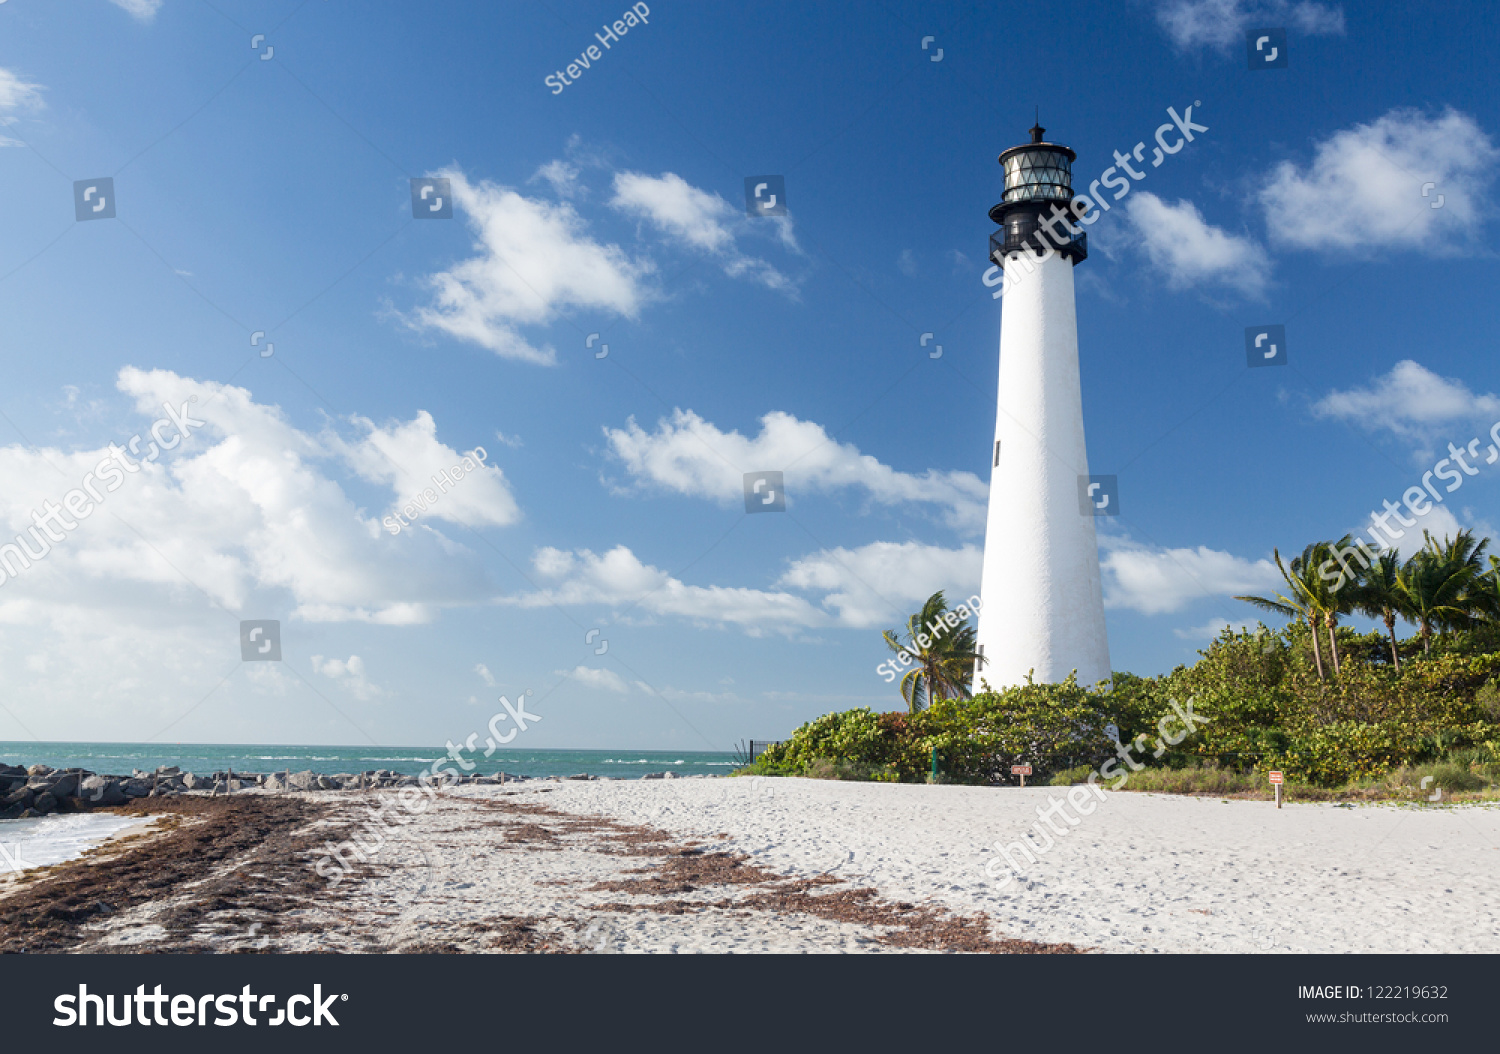 Cape Florida Lighthouse and Lantern in Bill Baggs State Park in Key Biscayne Florida #122219632